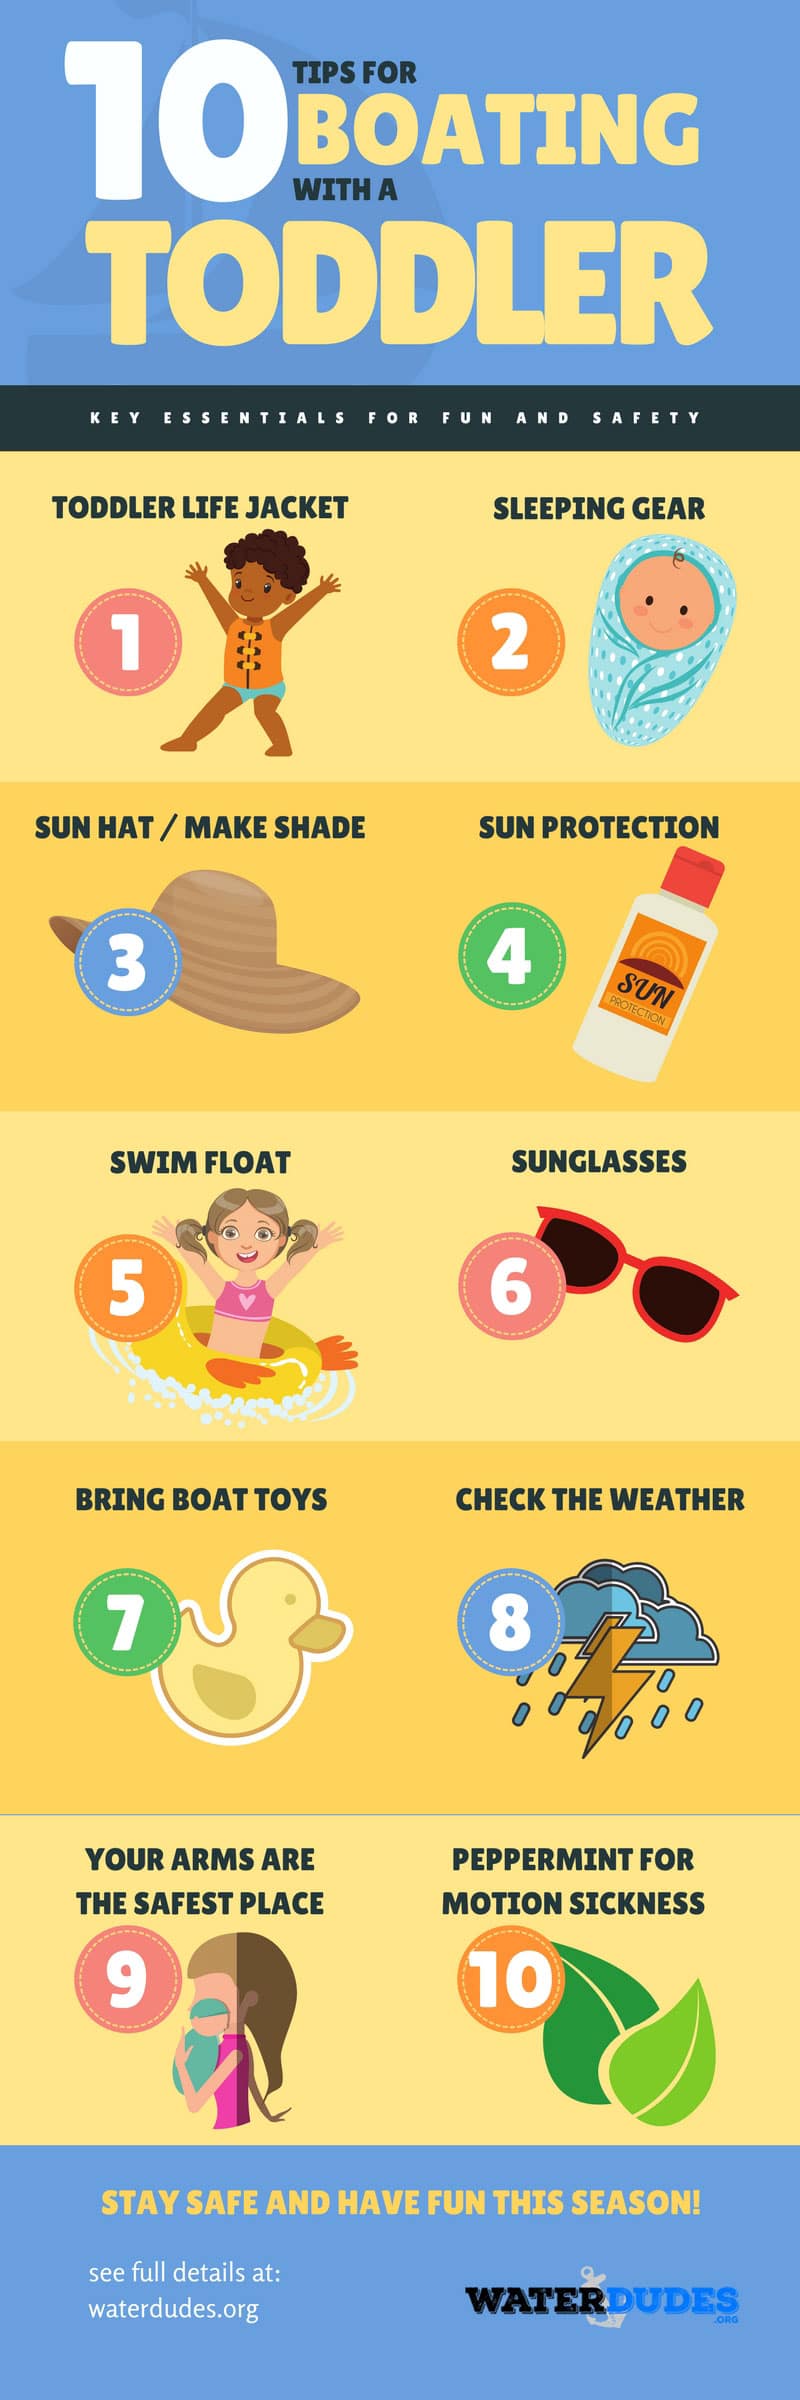 10 Tips Boating with Toddler